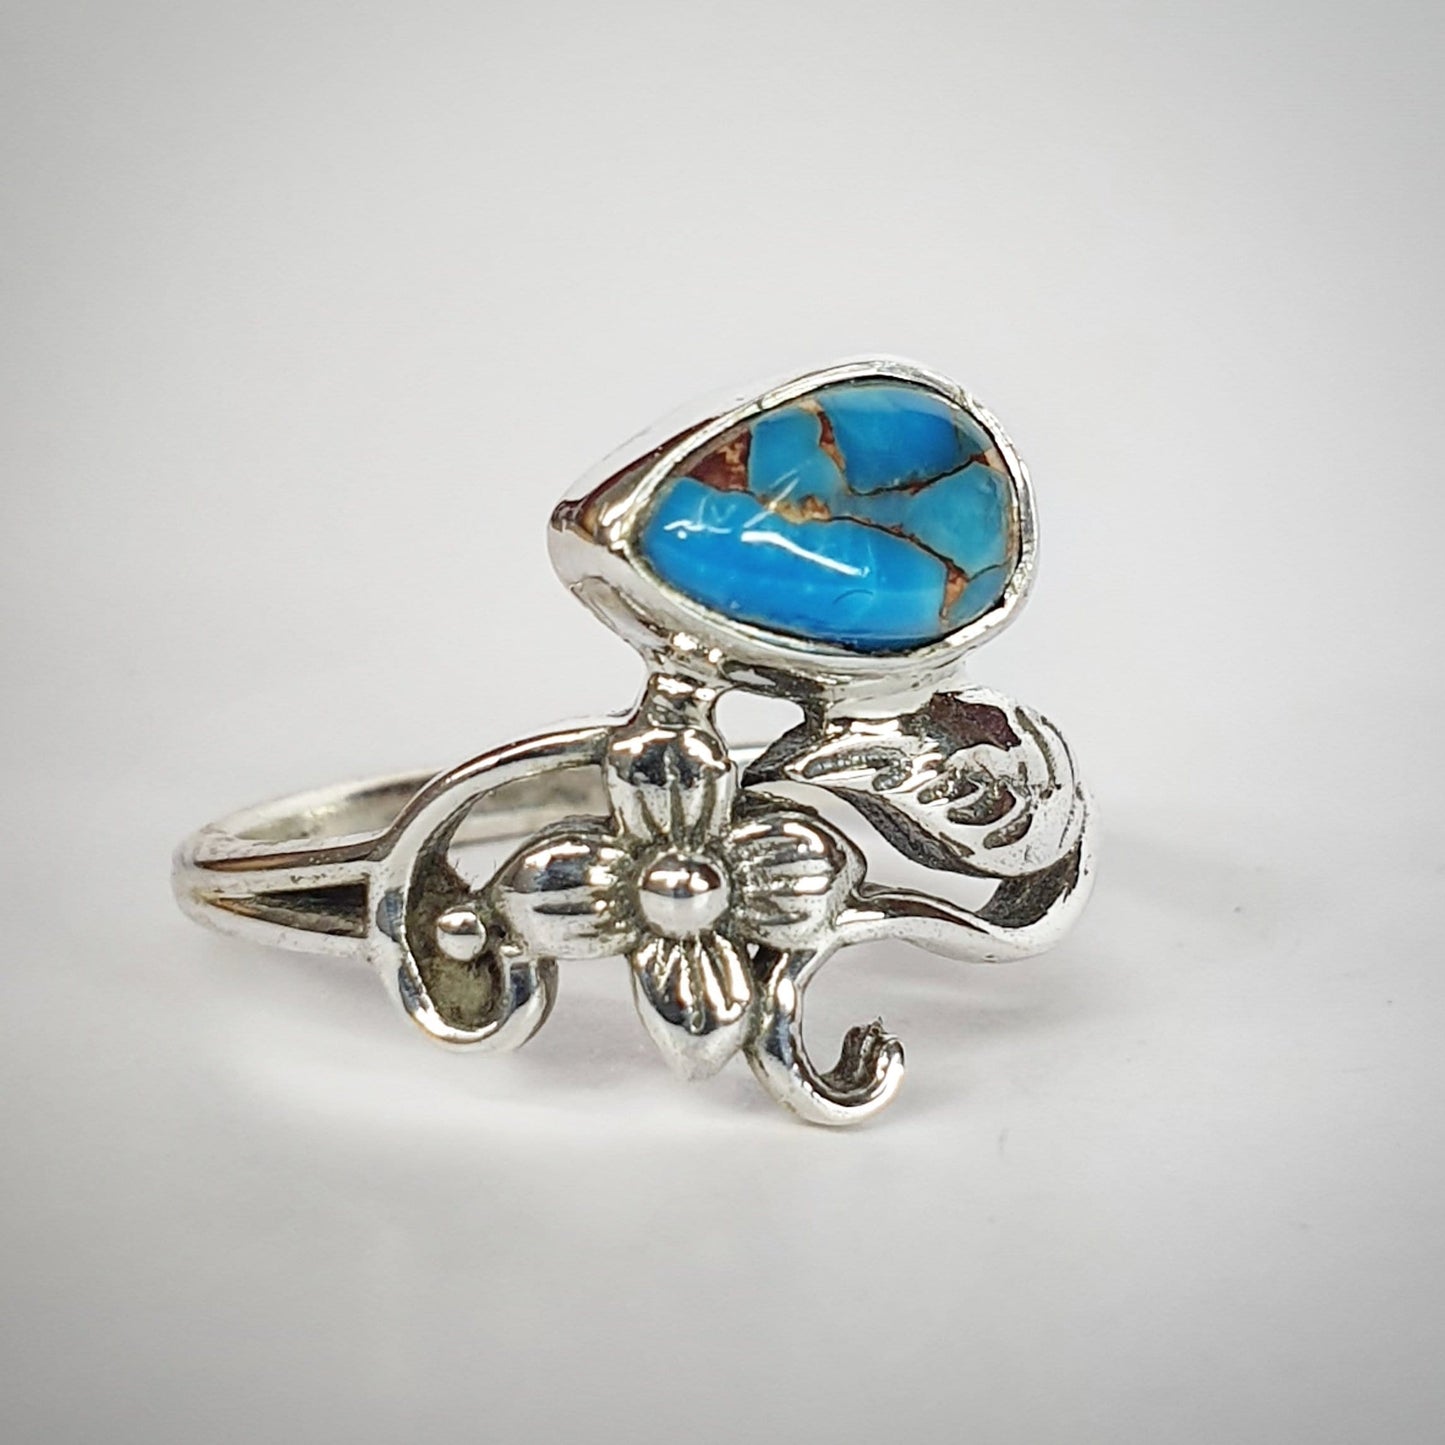 Turquoise Ring - Size 6 / L (SSR51)